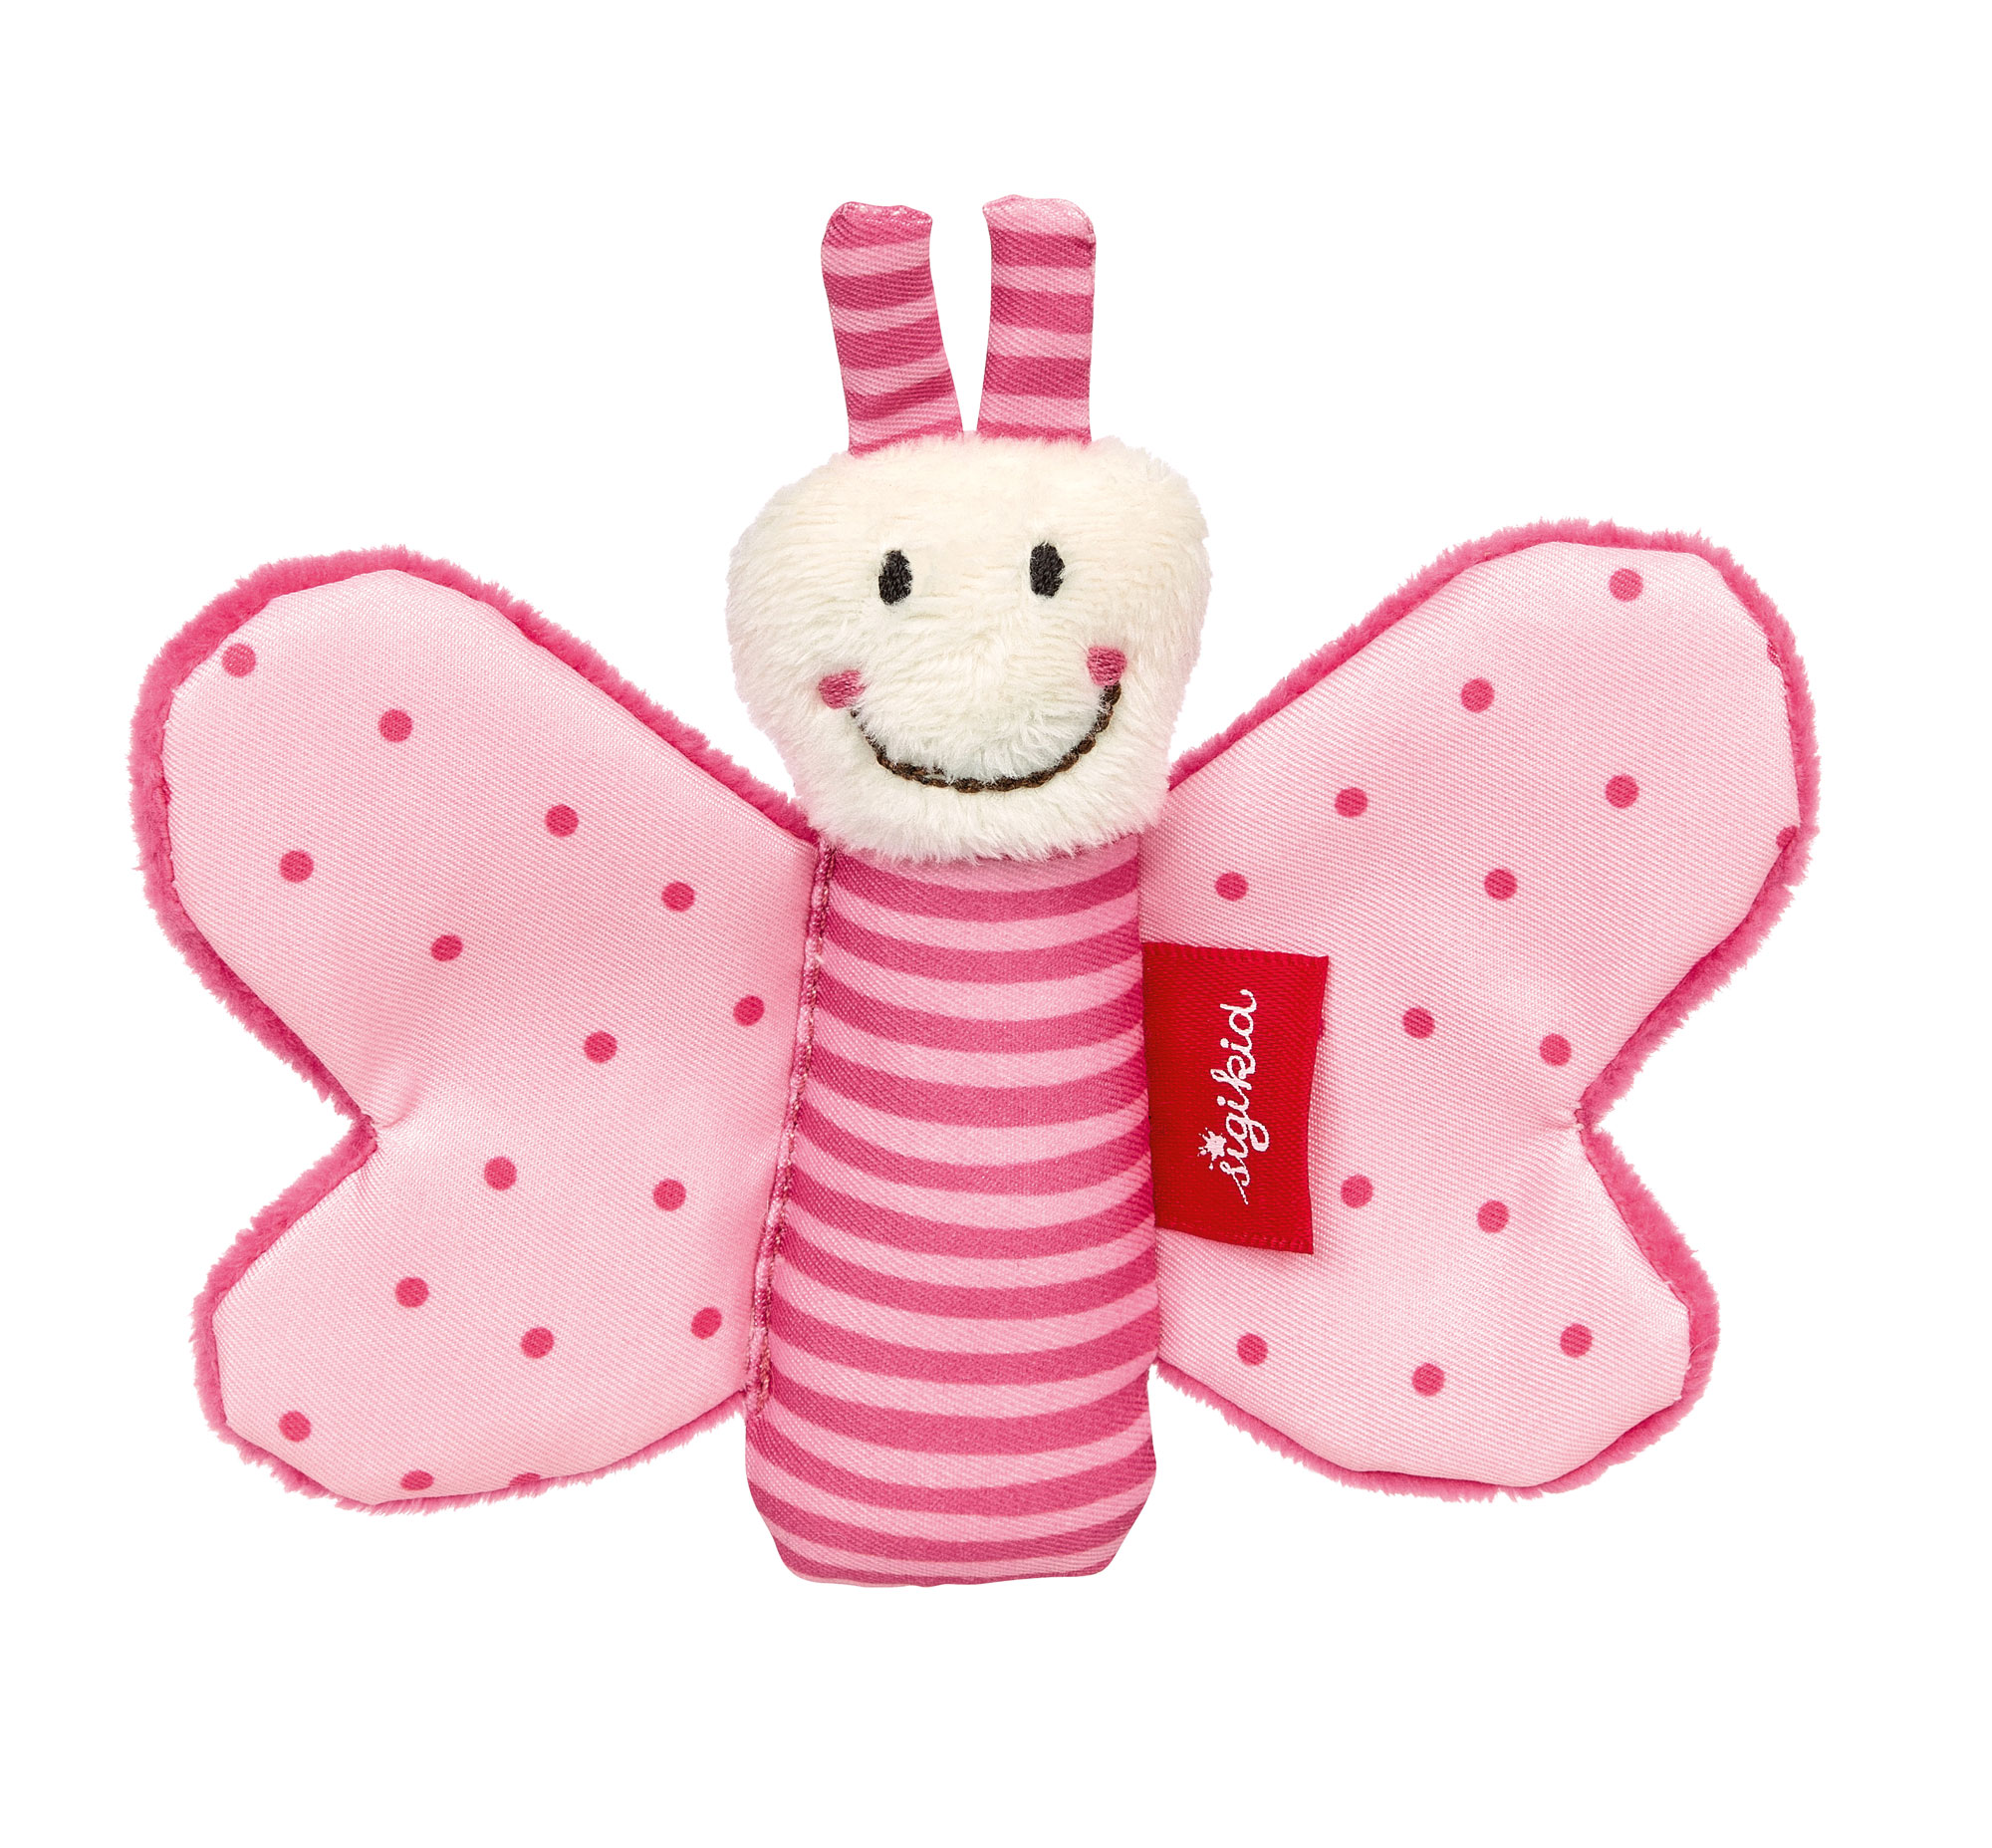 Butterfly baby soft toy rattle, pink